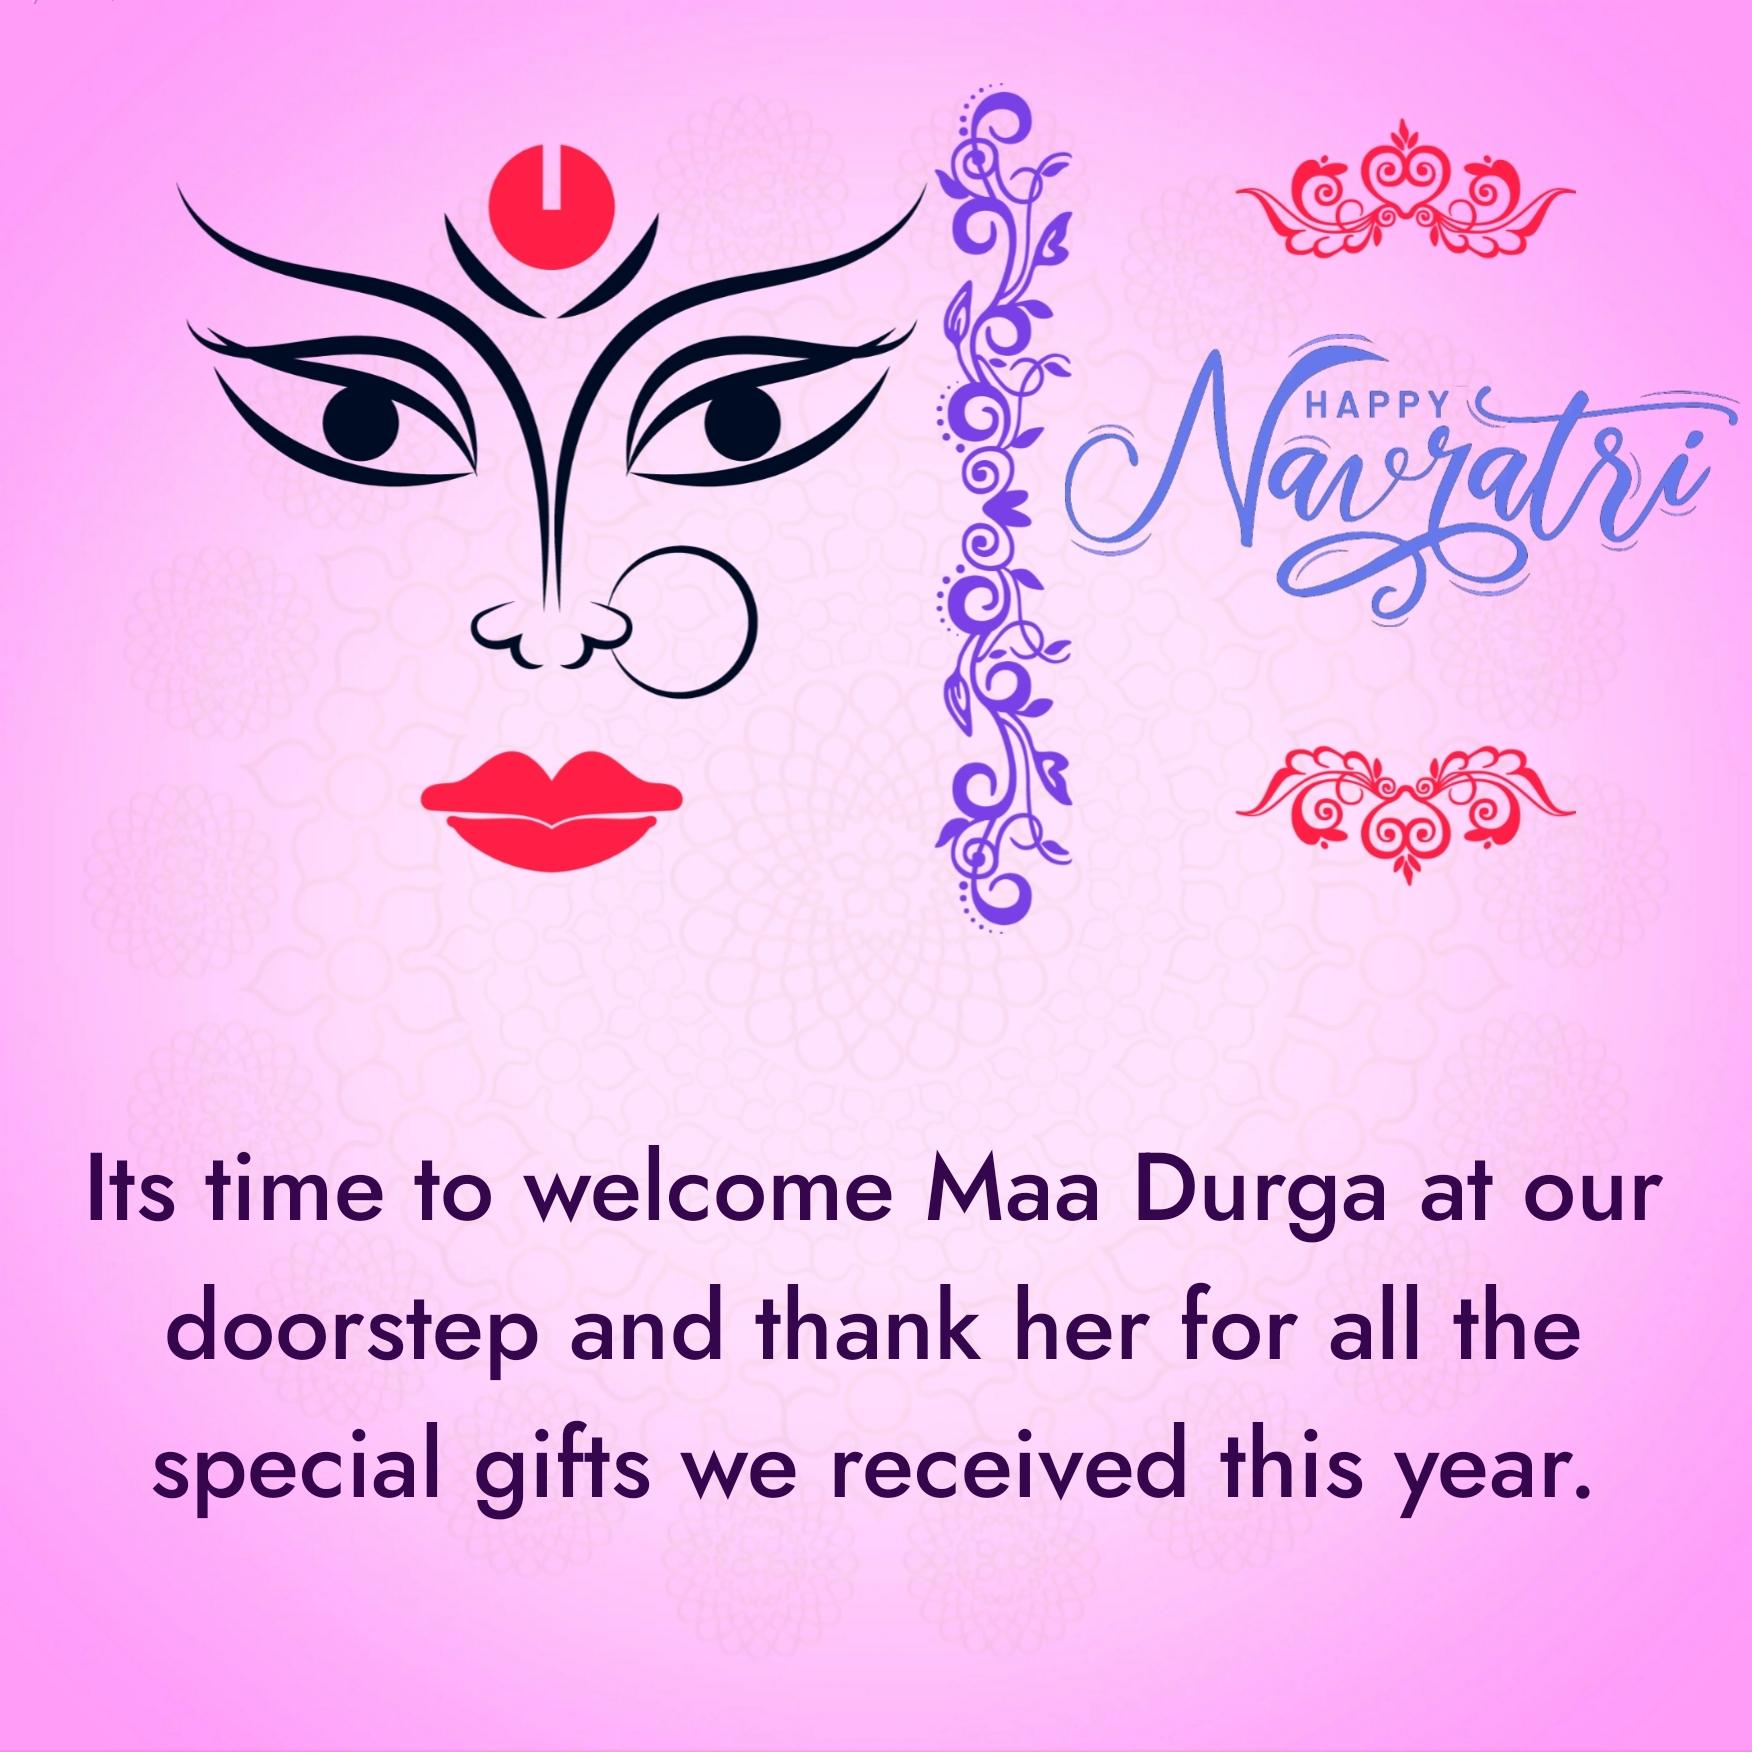 Its time to welcome Maa Durga at our doorstep